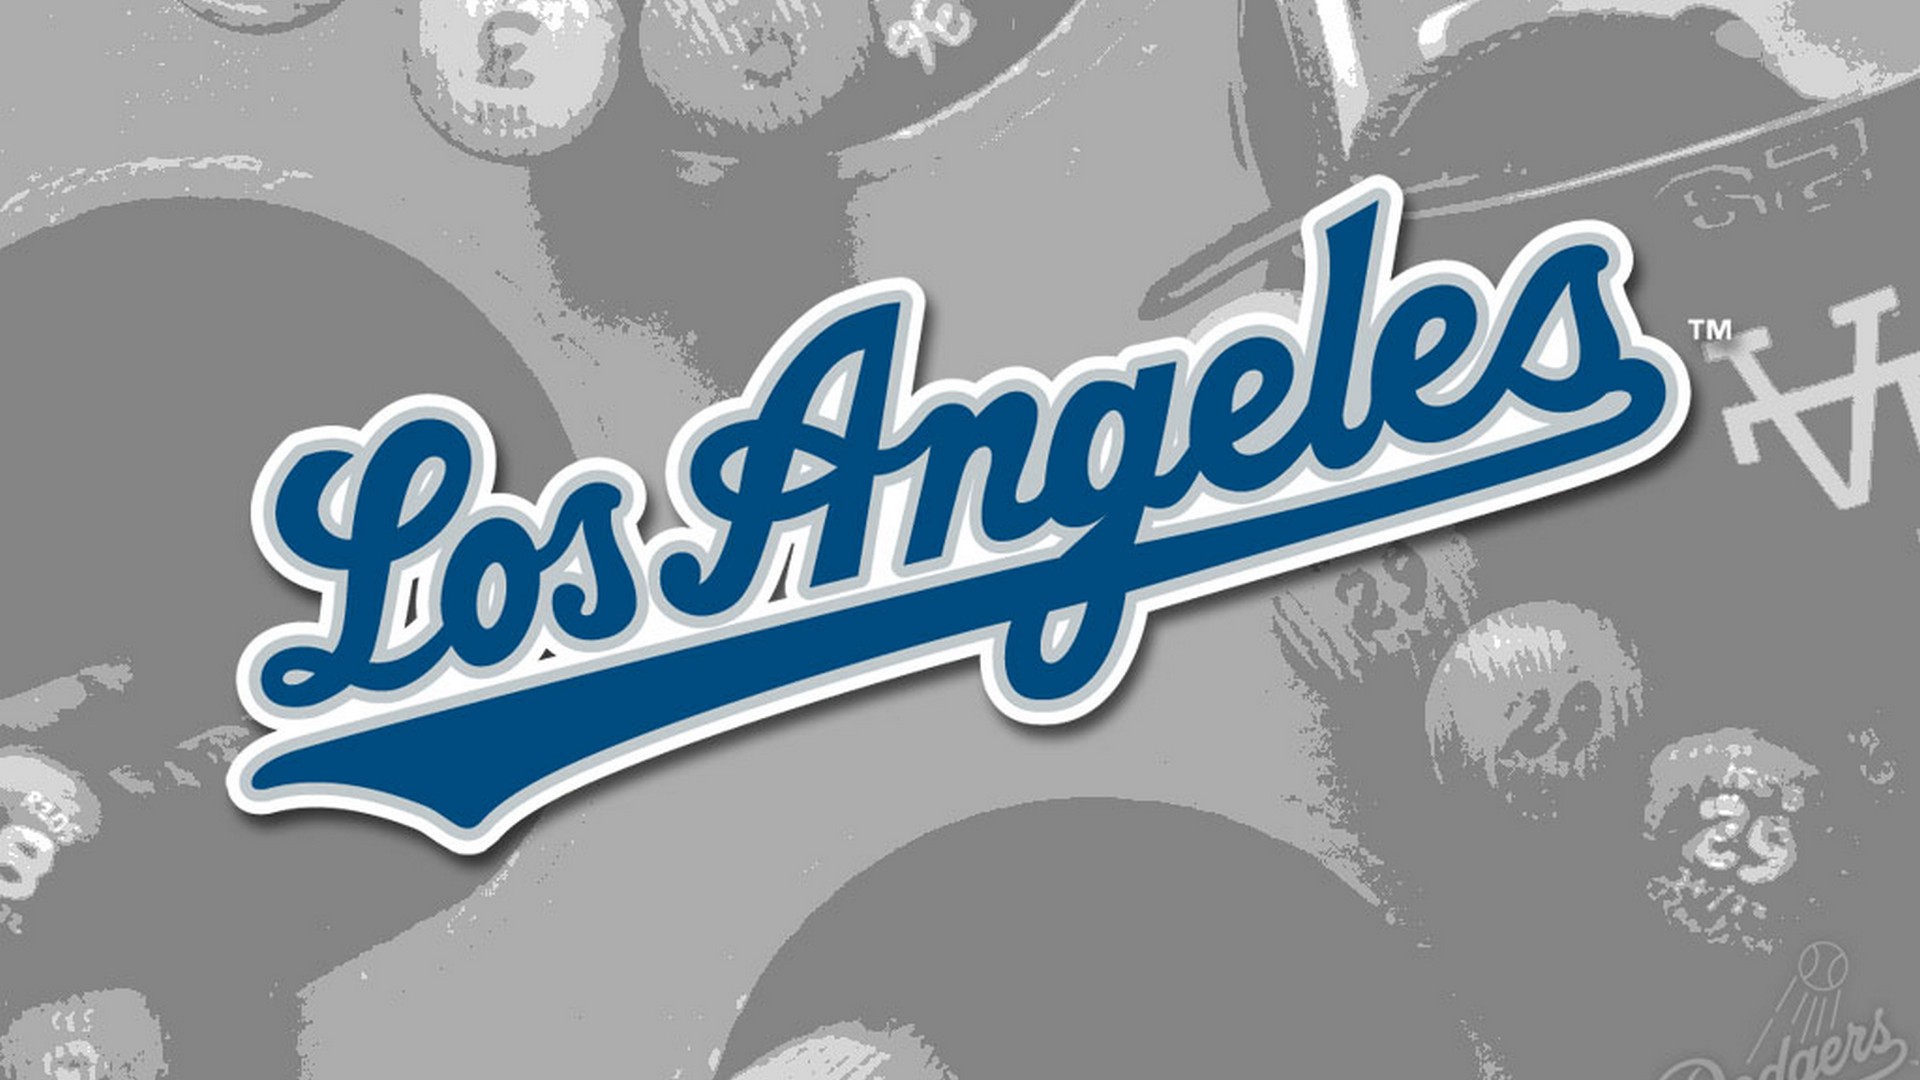 Los Angeles Dodgers MLB Wallpaper With high-resolution 1920X1080 pixel. You can use this wallpaper for Mac Desktop Wallpaper, Laptop Screensavers, Android Wallpapers, Tablet or iPhone Home Screen and another mobile phone device